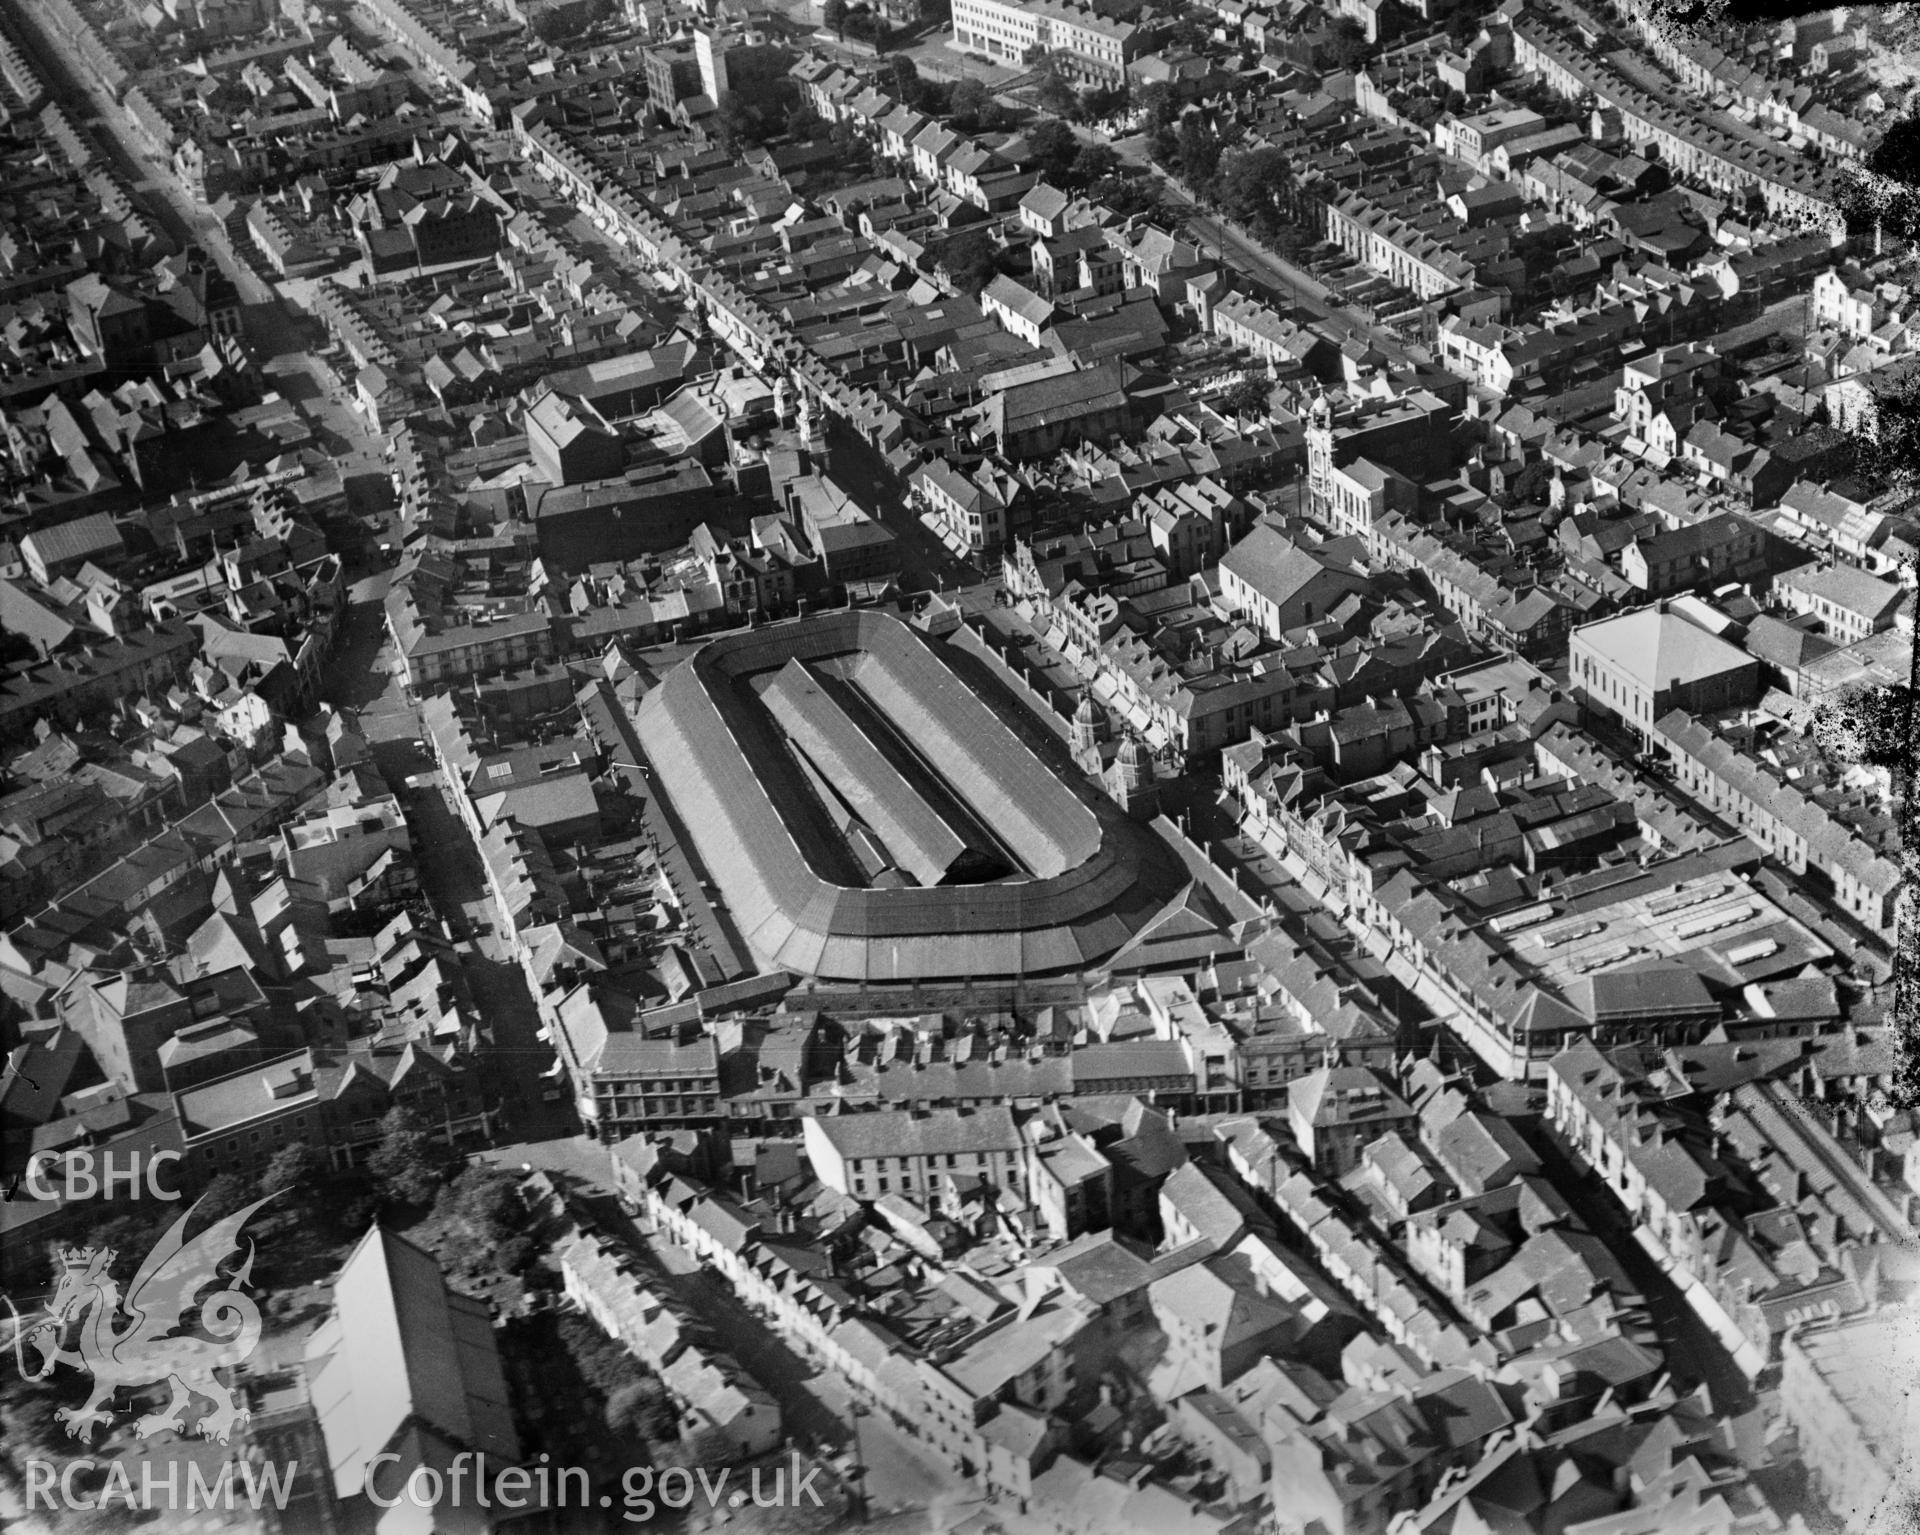 View of Market Hall, Swansea, oblique aerial view. 5?x4? black and white glass plate negative.